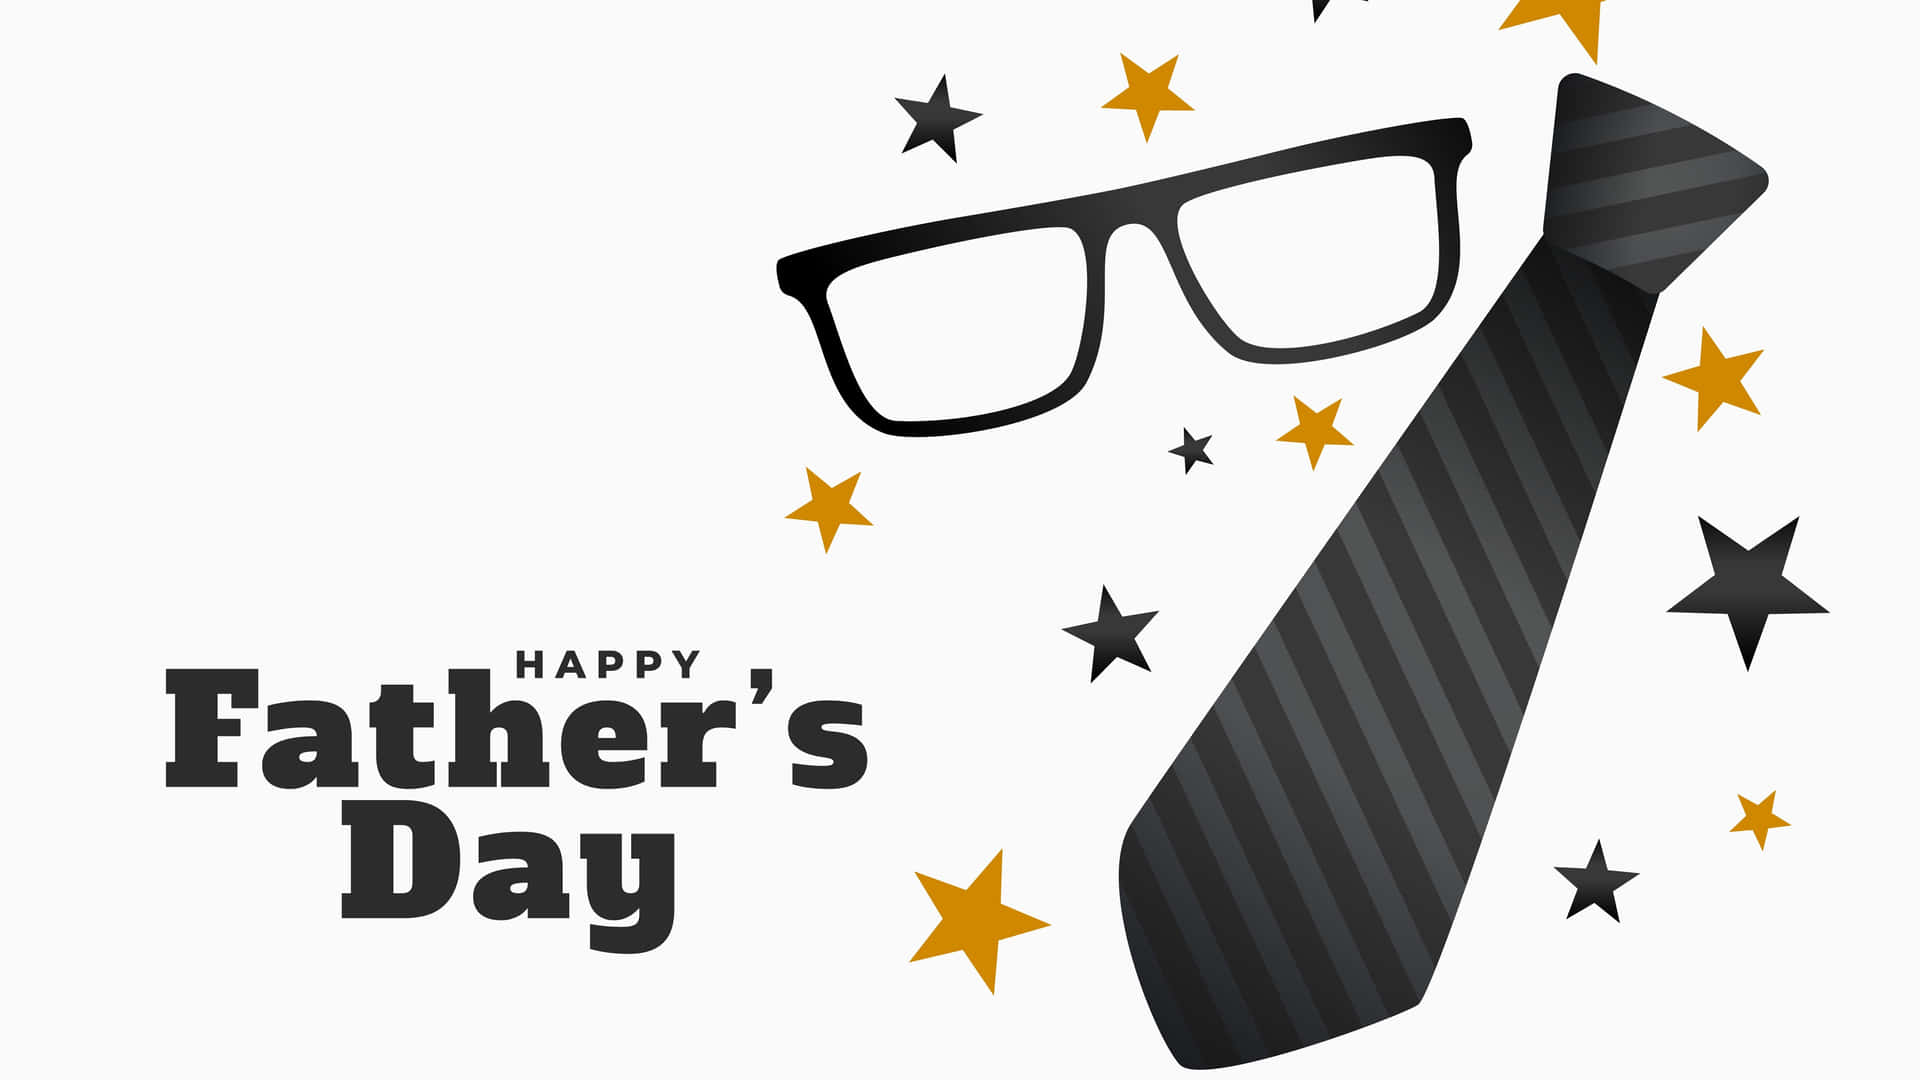 Show your Dad how much you care this Father's Day